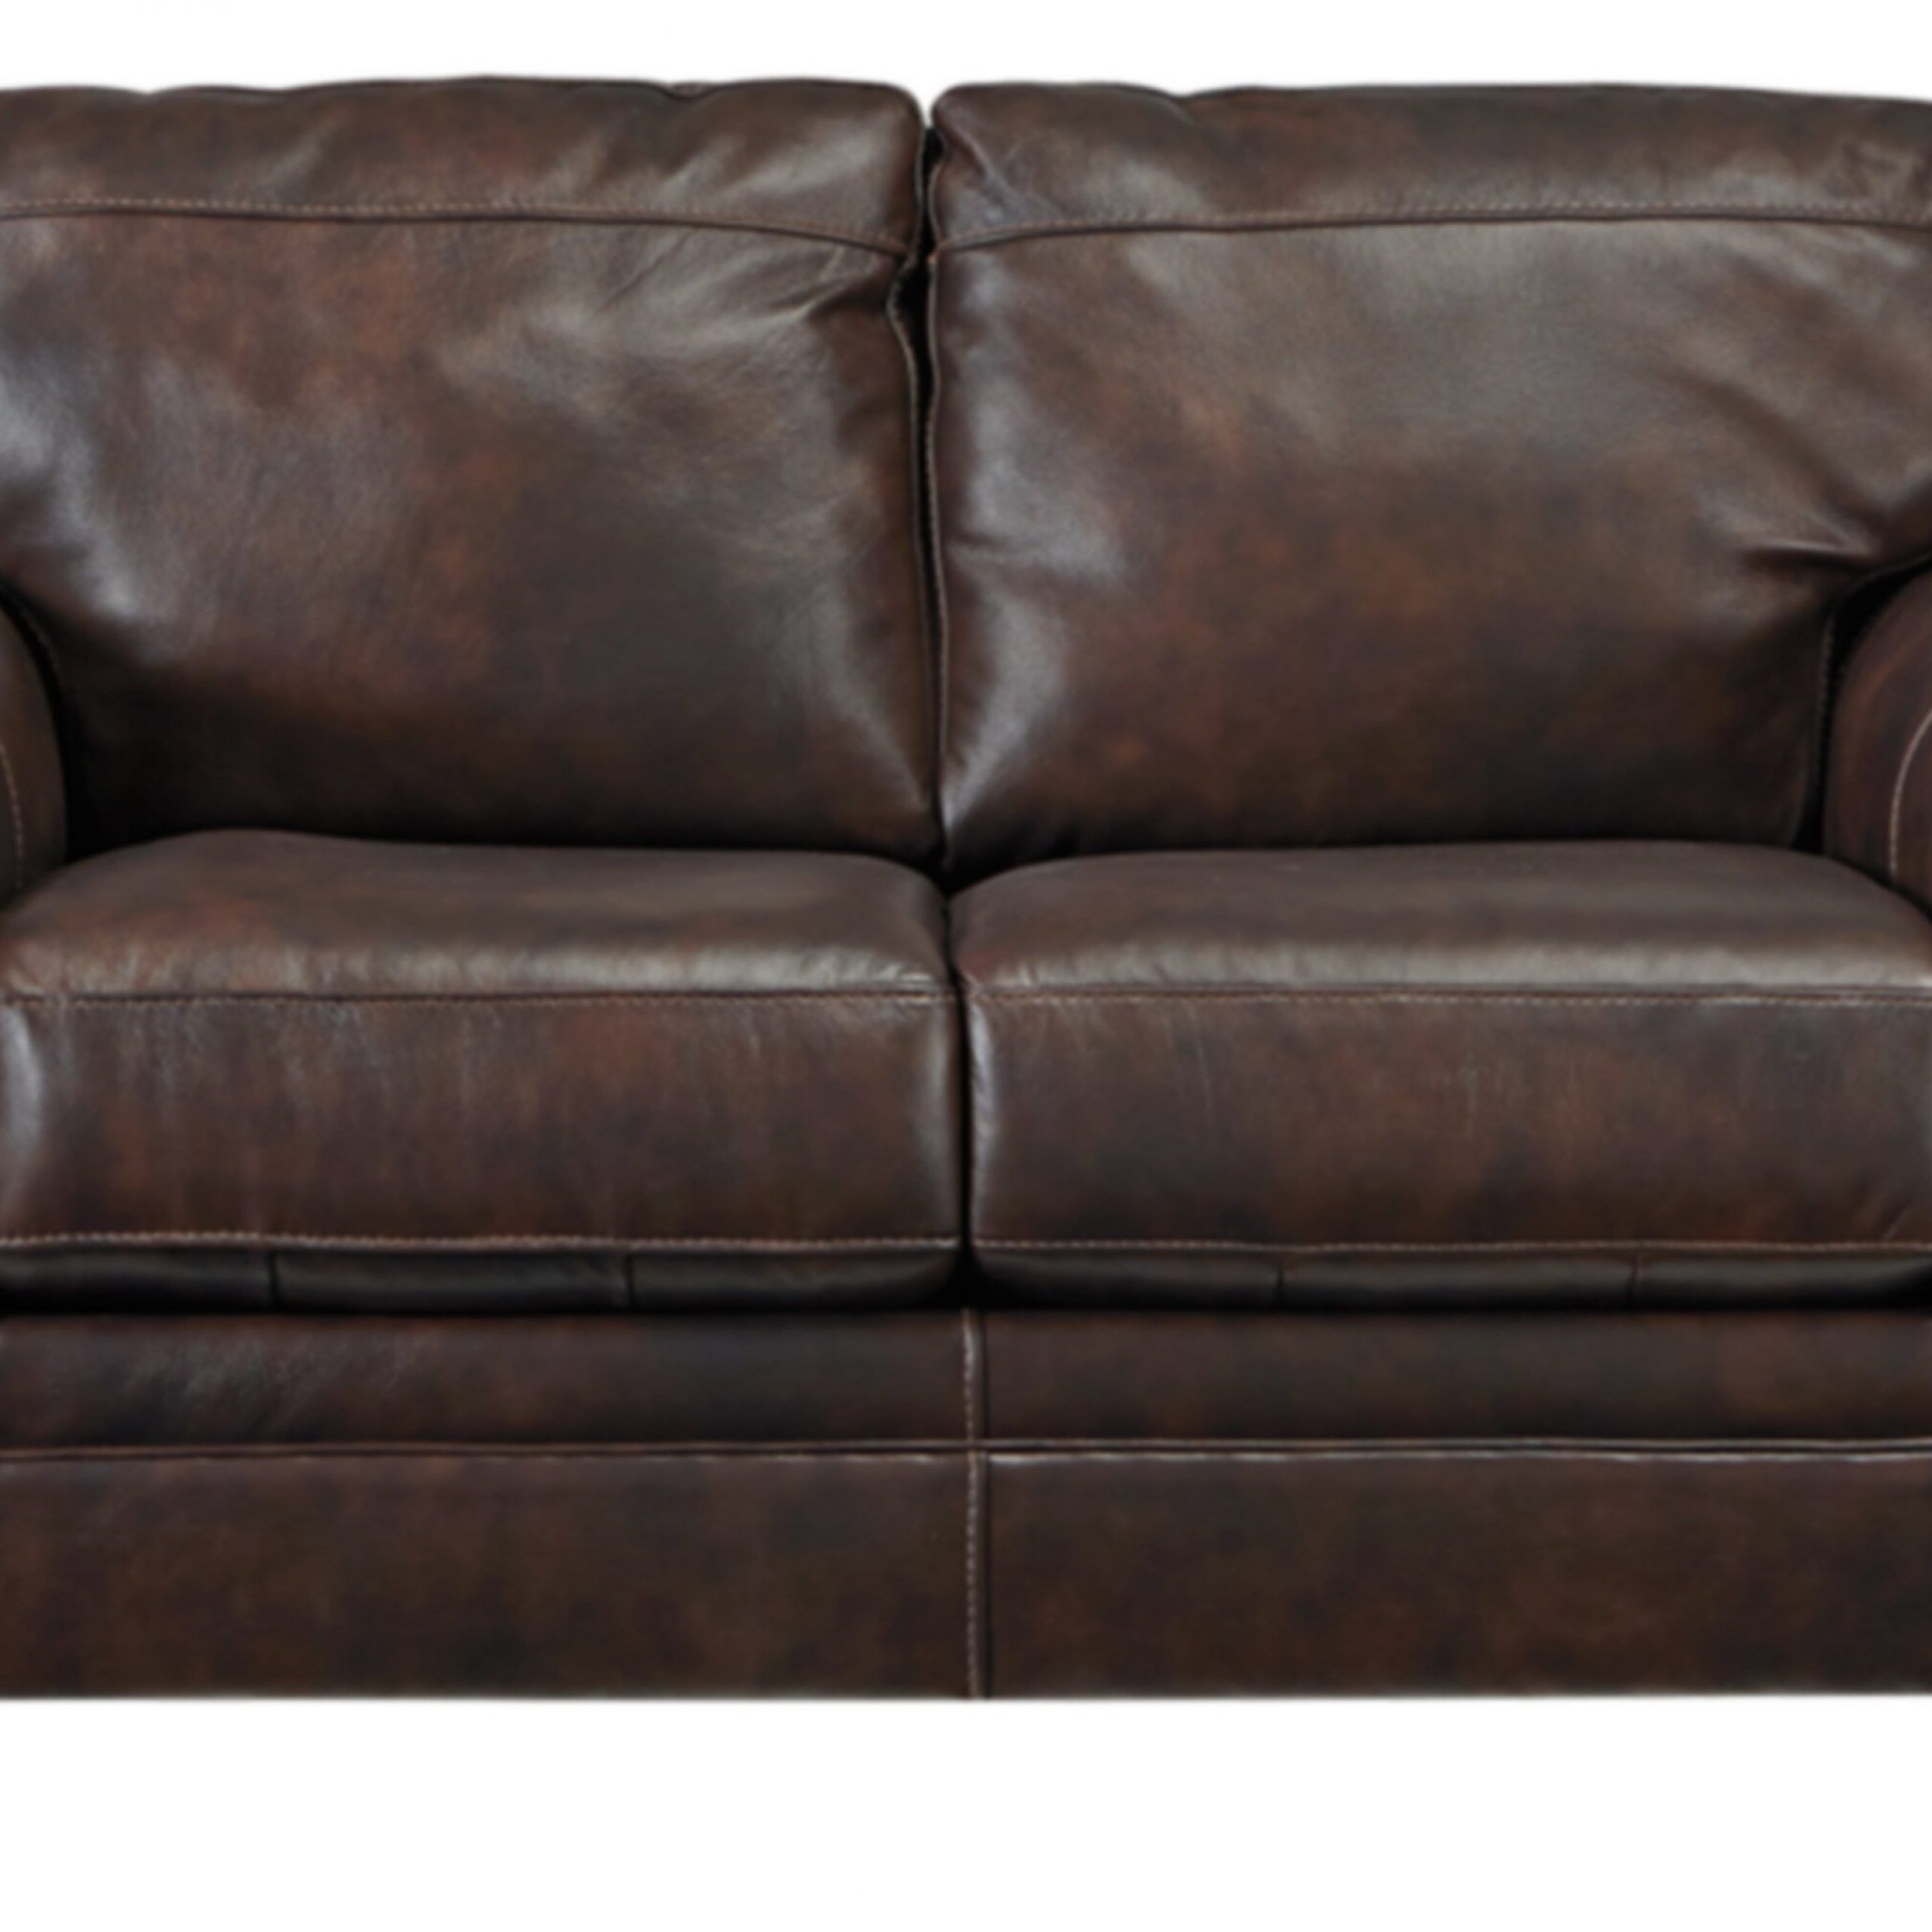 Latest Baxter Springs Loveseat Pertaining To Landis Loveseats With Cushions (View 23 of 25)